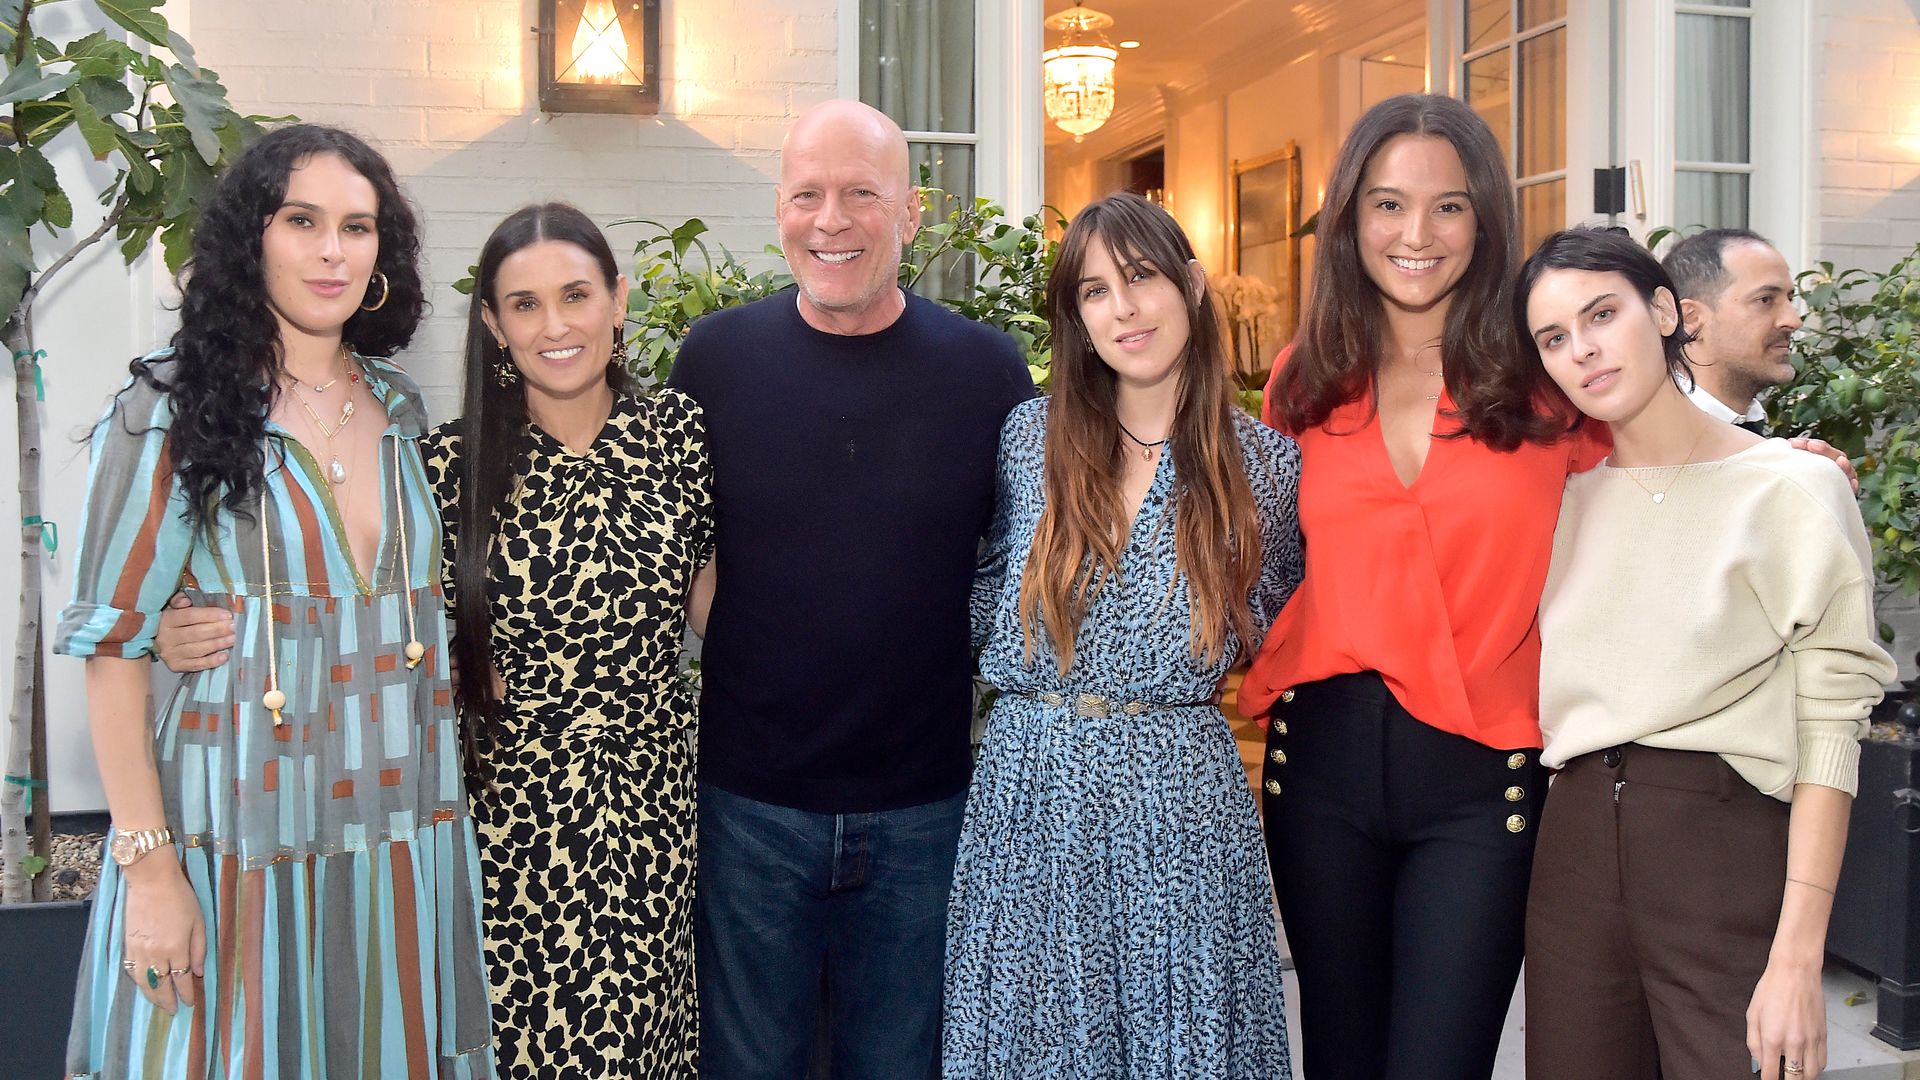 Rumer Willis, Demi Moore, Bruce Willis, Scout Willis, Emma Heming Willis and Tallulah Willis attend Demi Moore's 'Inside Out' Book Party on September 23, 2019